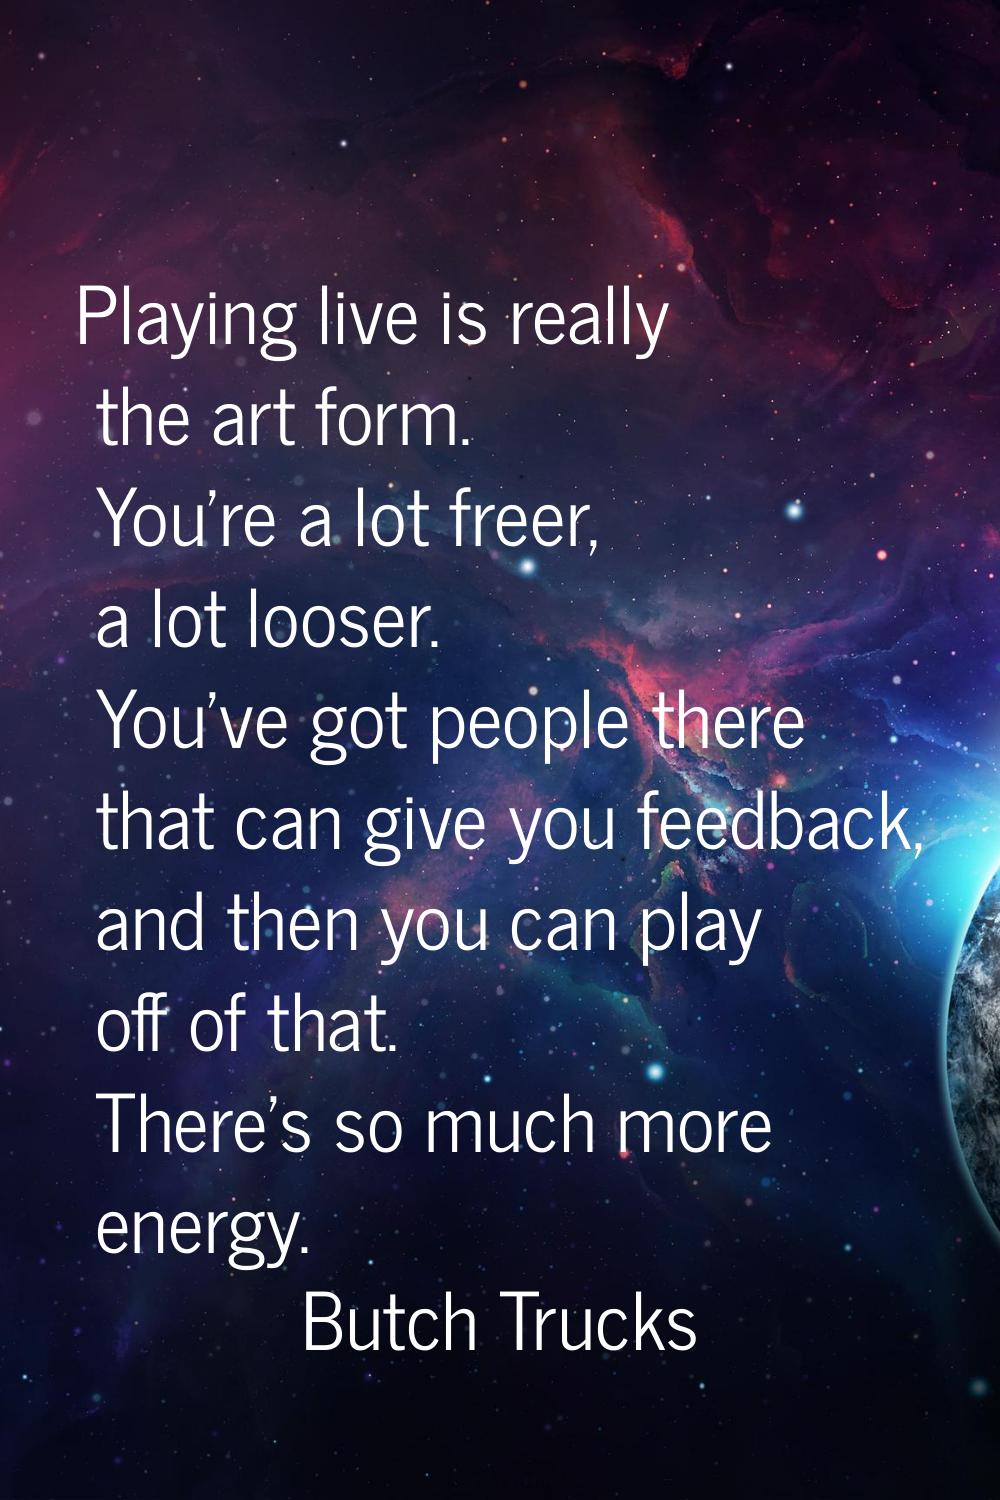 Playing live is really the art form. You're a lot freer, a lot looser. You've got people there that